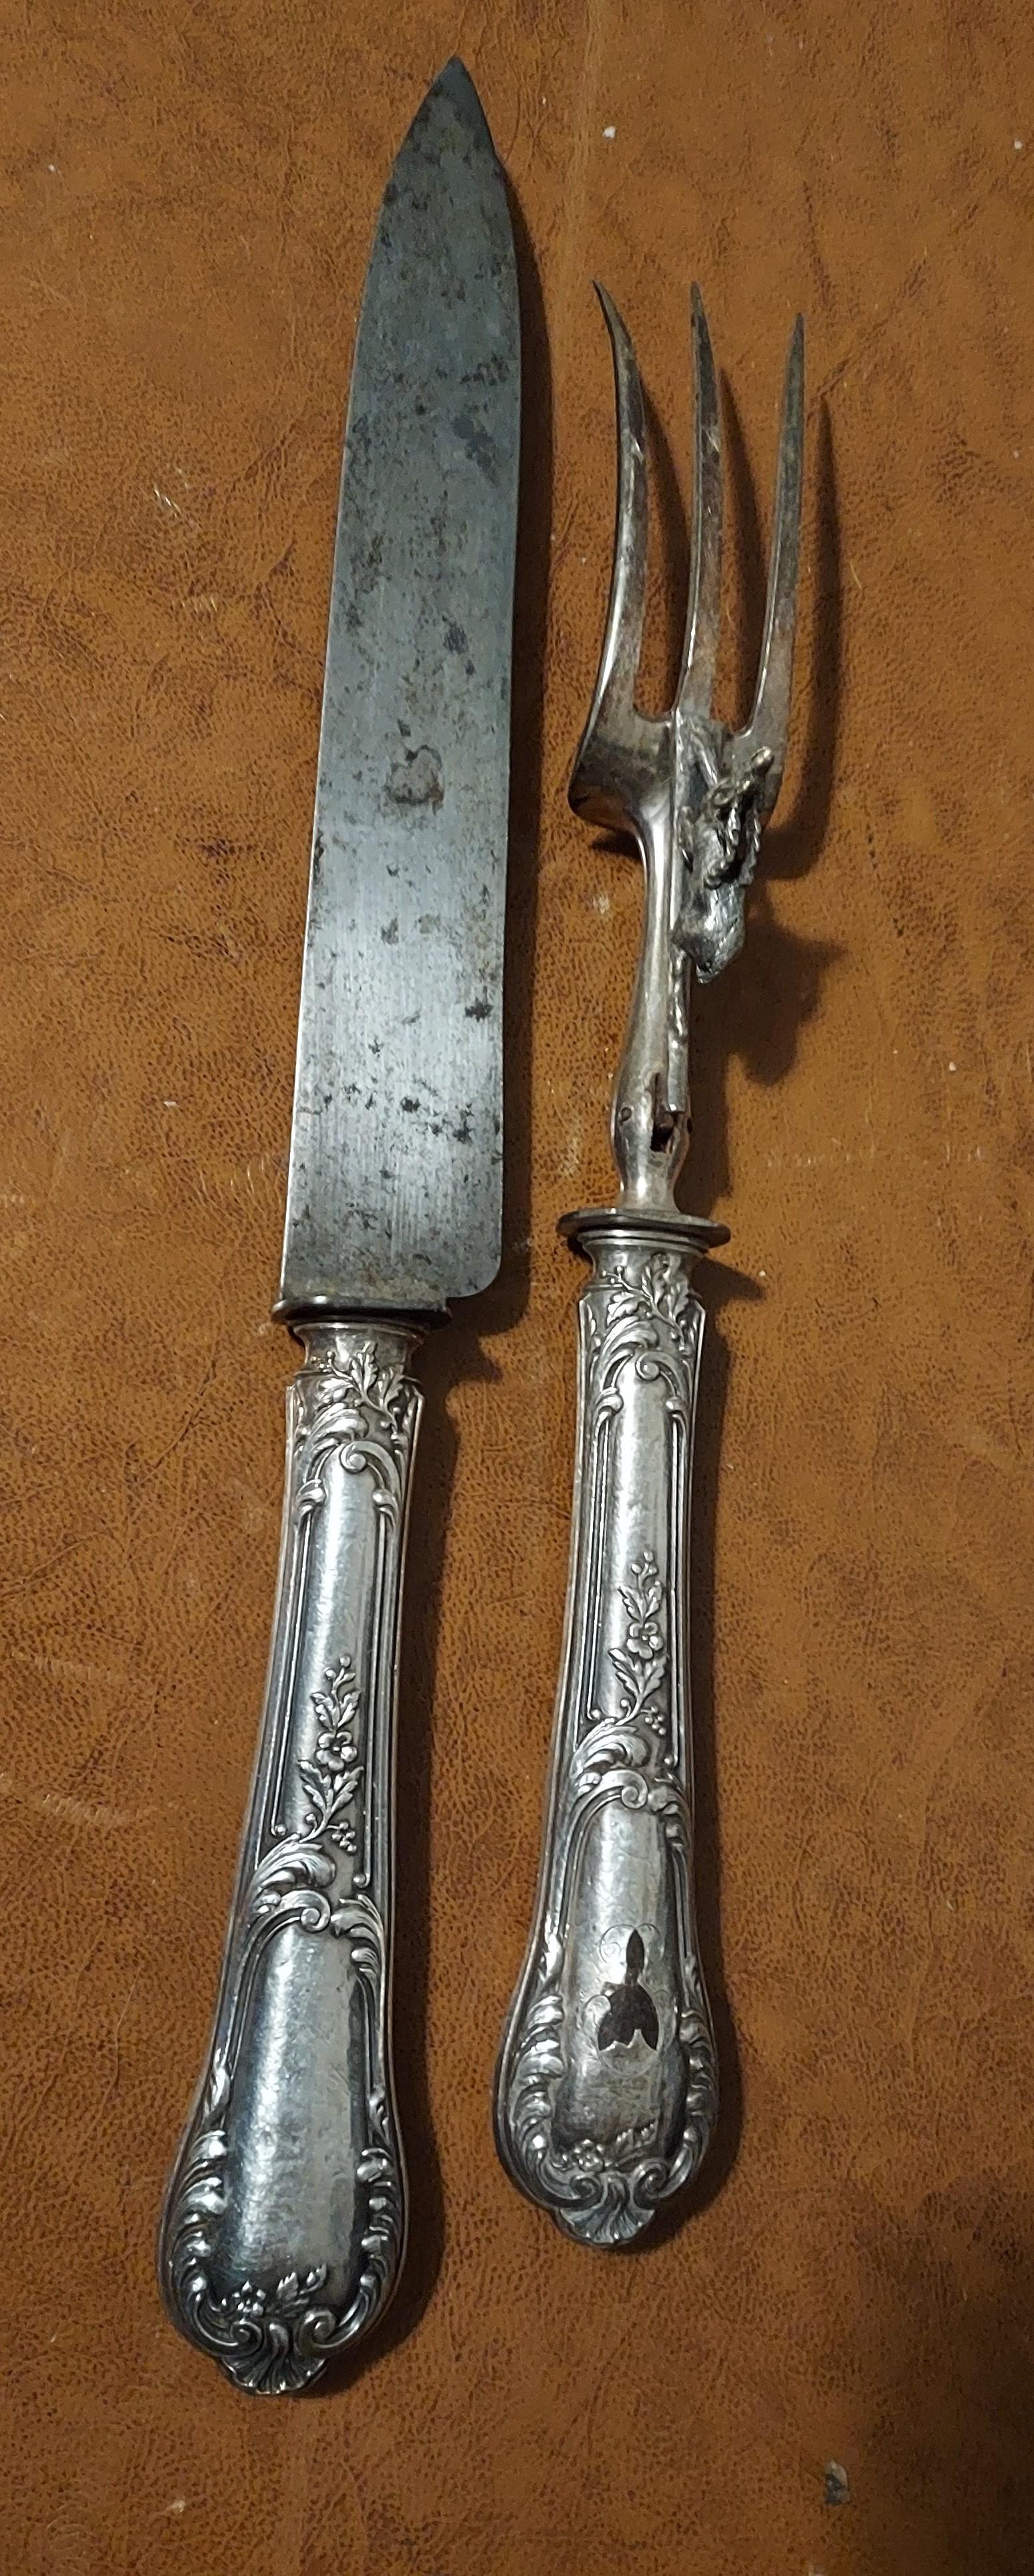 French Antique Silver Carving Set of Knofe and Fork embellished with a protective Stag For Sale